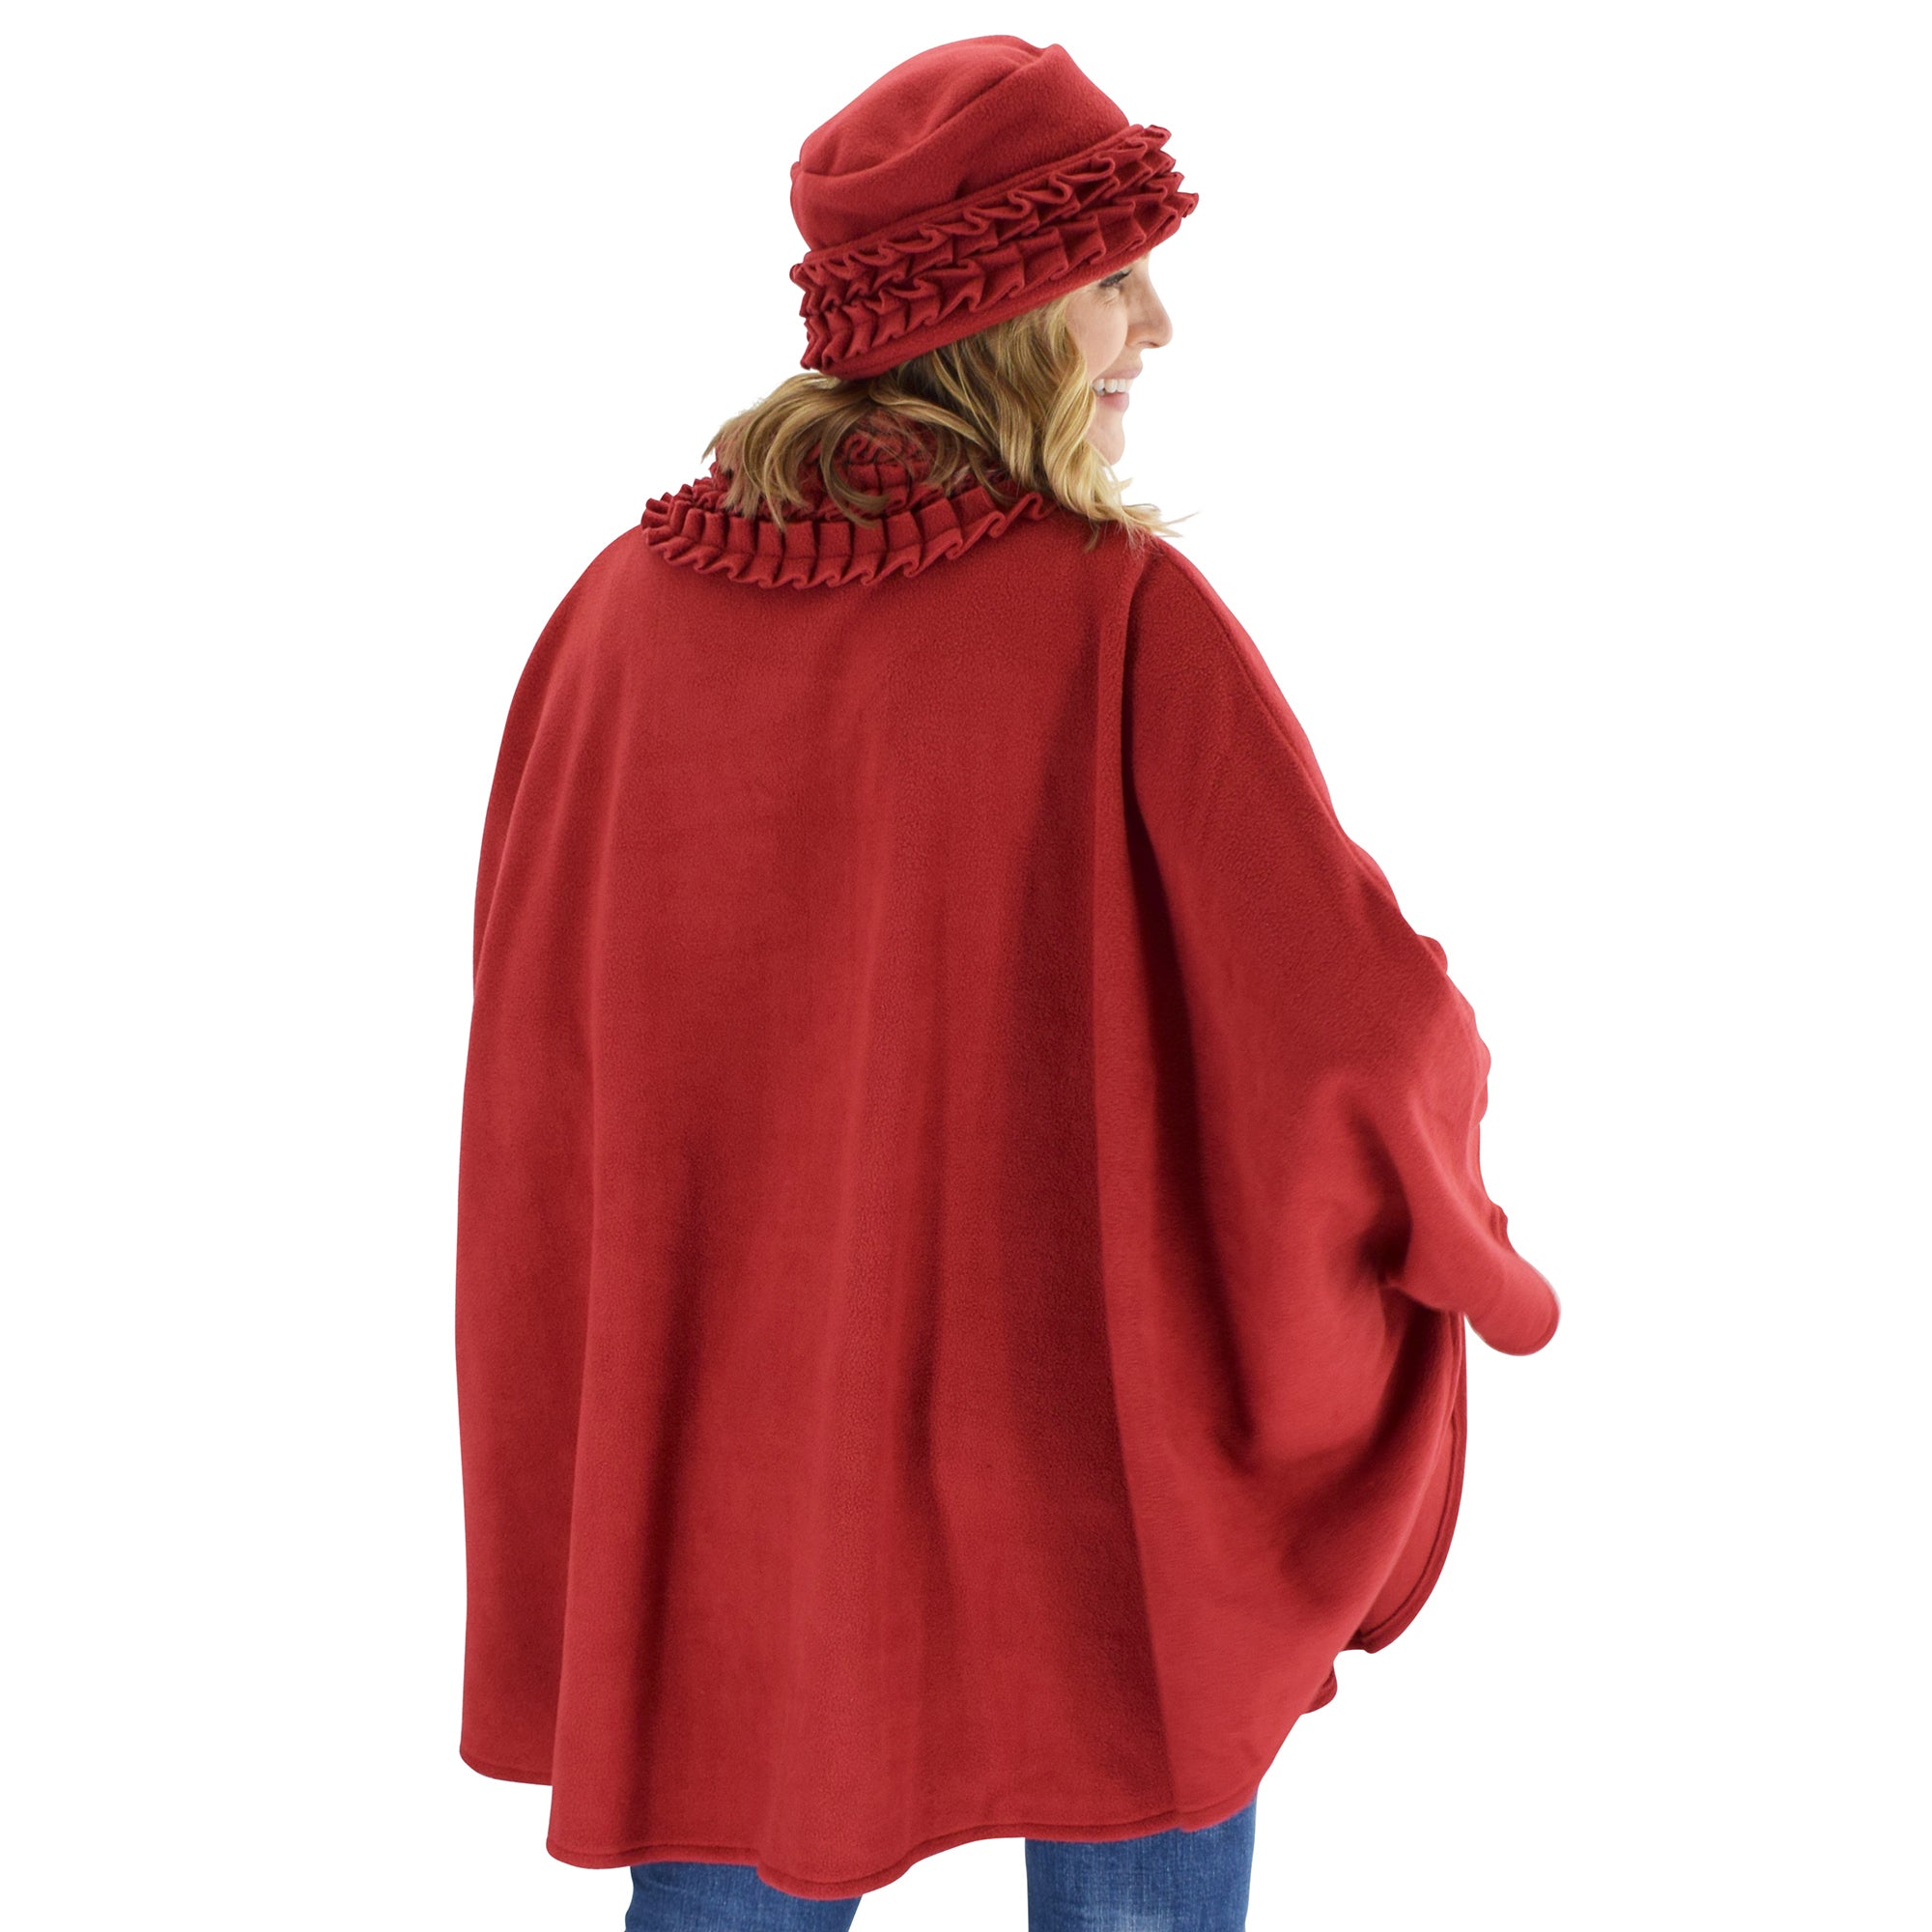 Le Moda Women's Ruffed collar Fleece Wrap with Matching Gloves and Hat - One Size Fits All at Linda Anderson. color_red